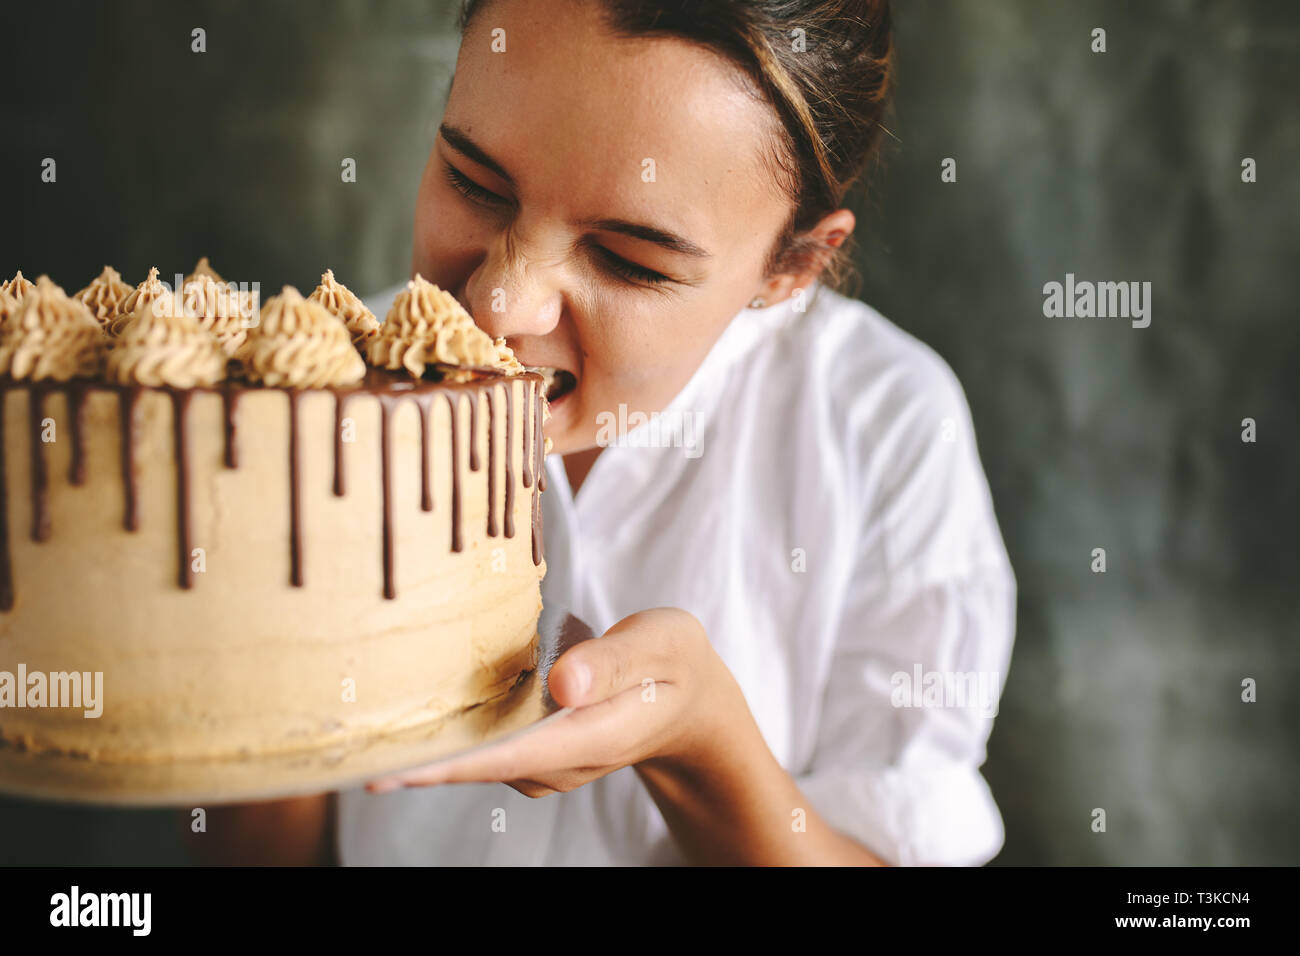 Female chef eating whole cake. Chef holding a big cake in hand and taking a bite. Stock Photo